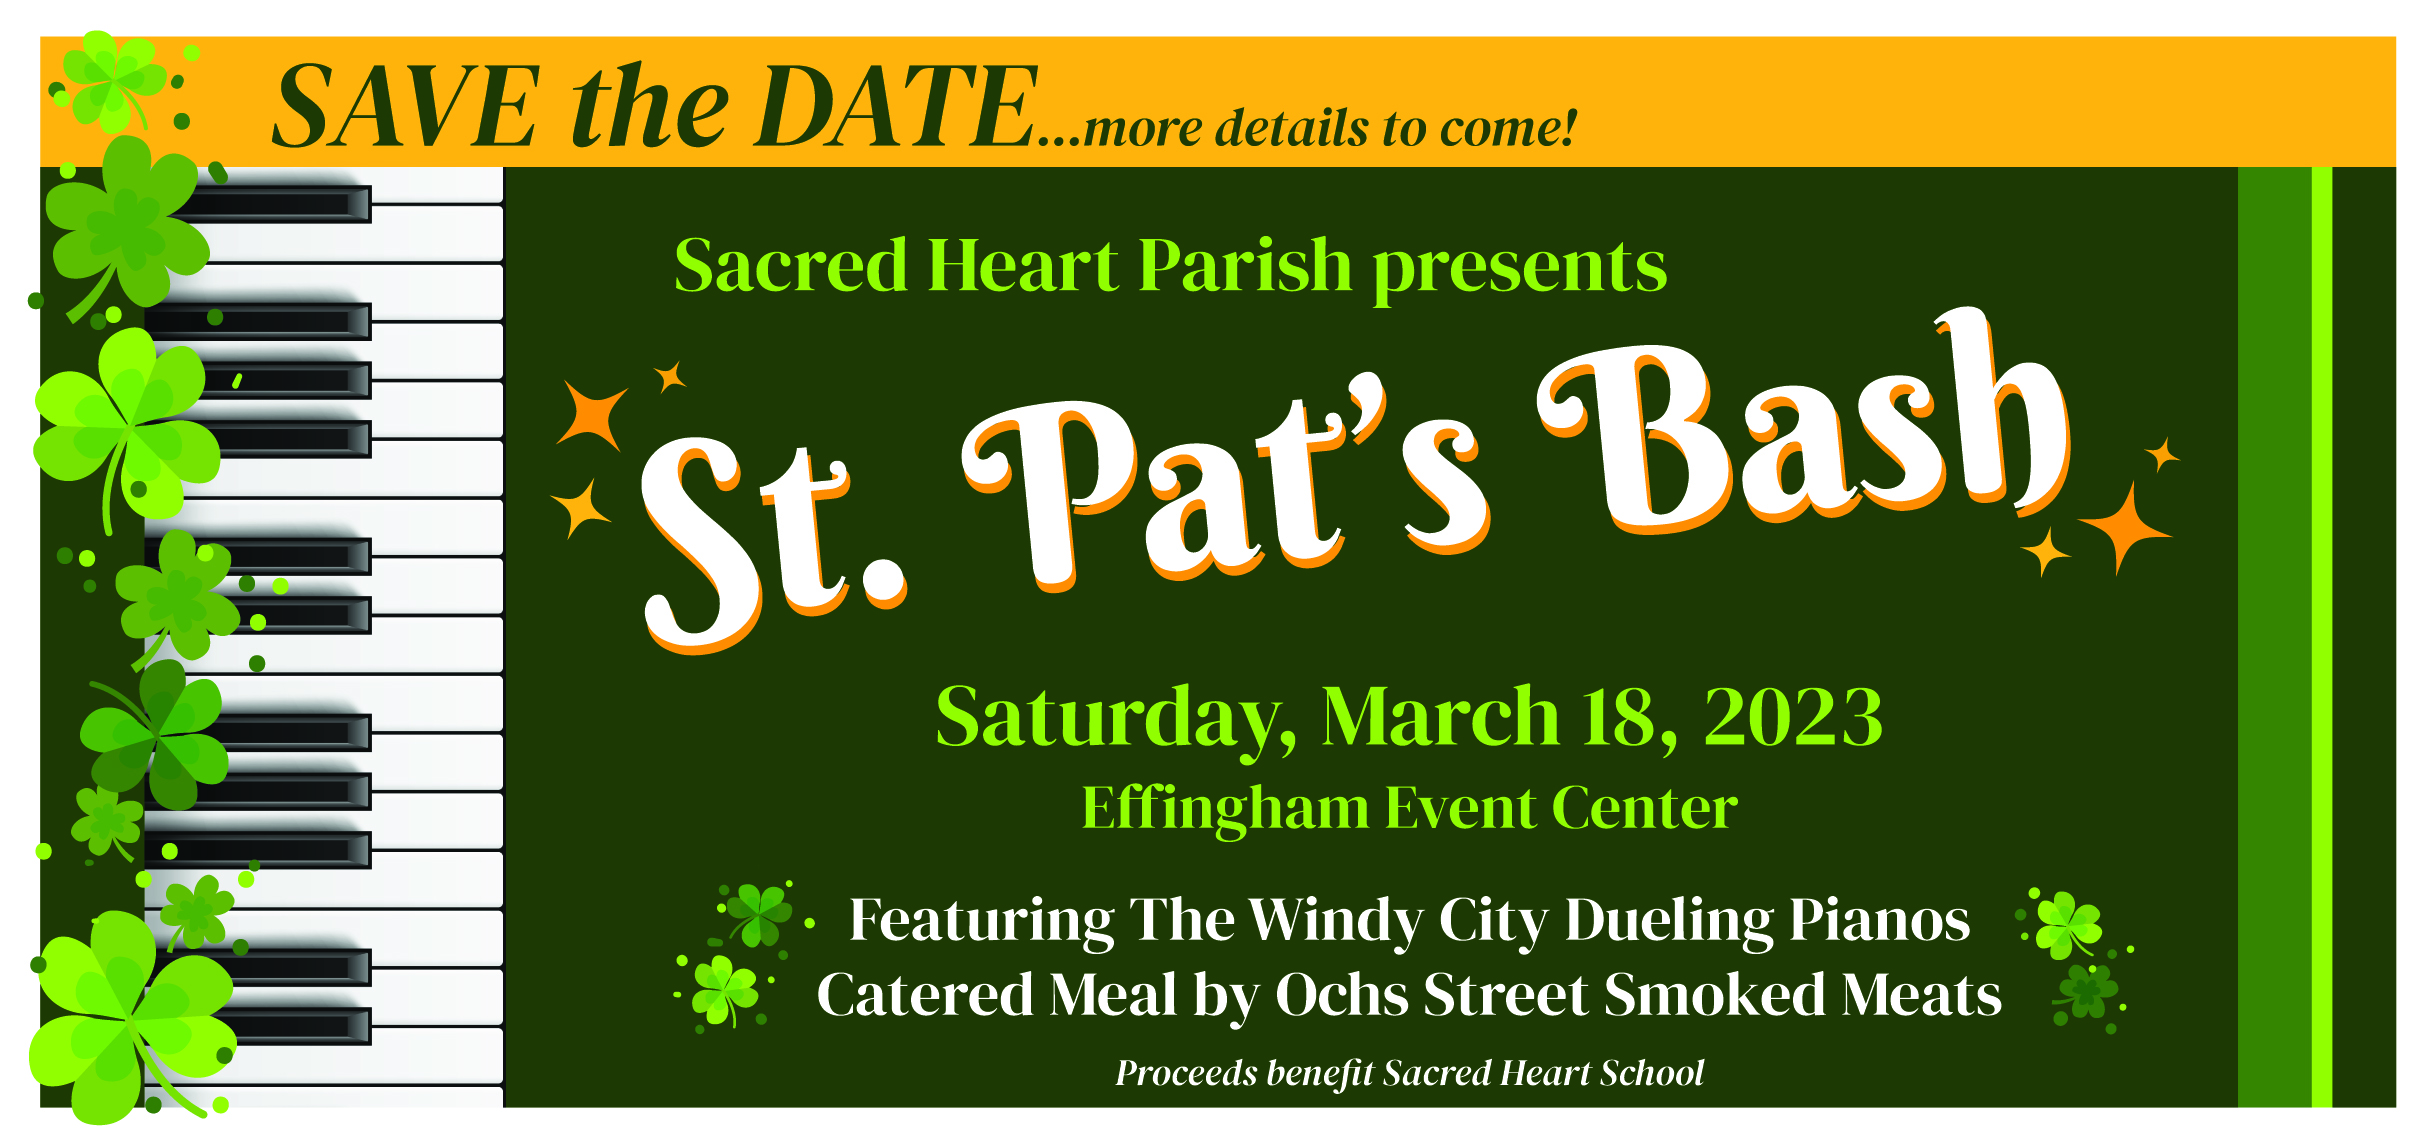 Save the Date announcement for St Pat's Bash